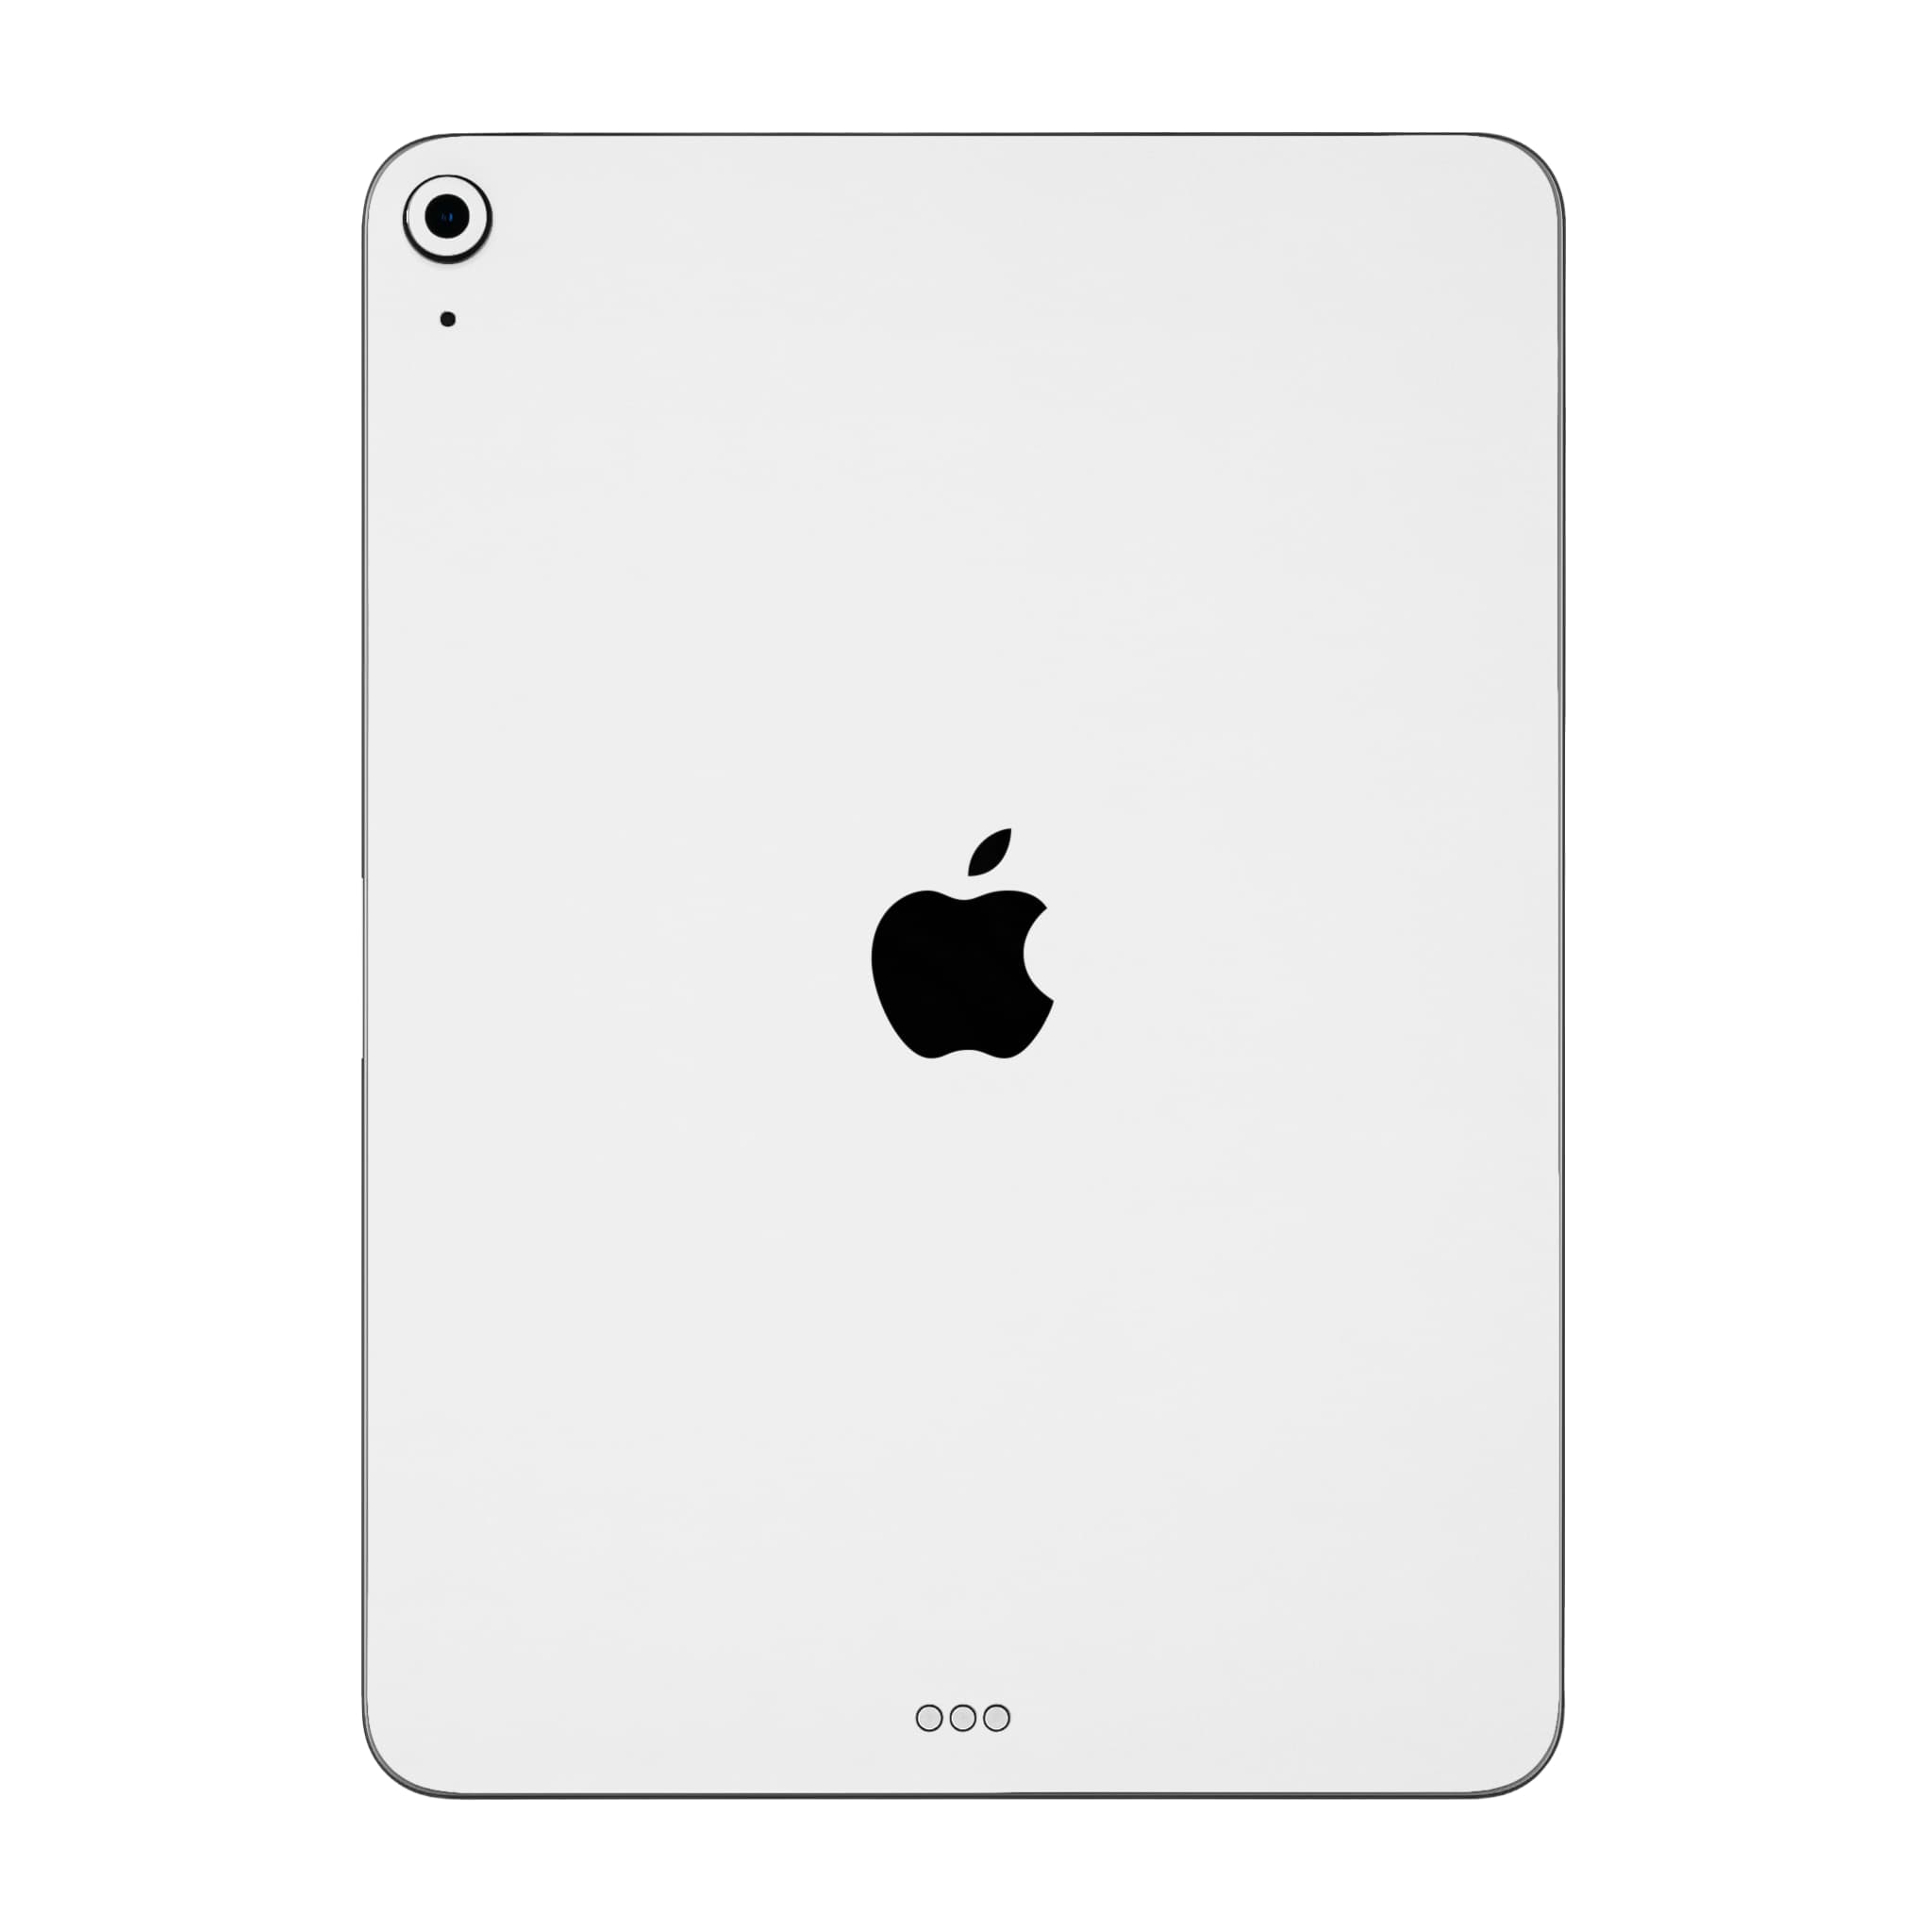 Made in USA RT.Skins Premium Full Body Vinyl Wrap Skin for Apple iPad Air 2020 Many Color Options High Quality